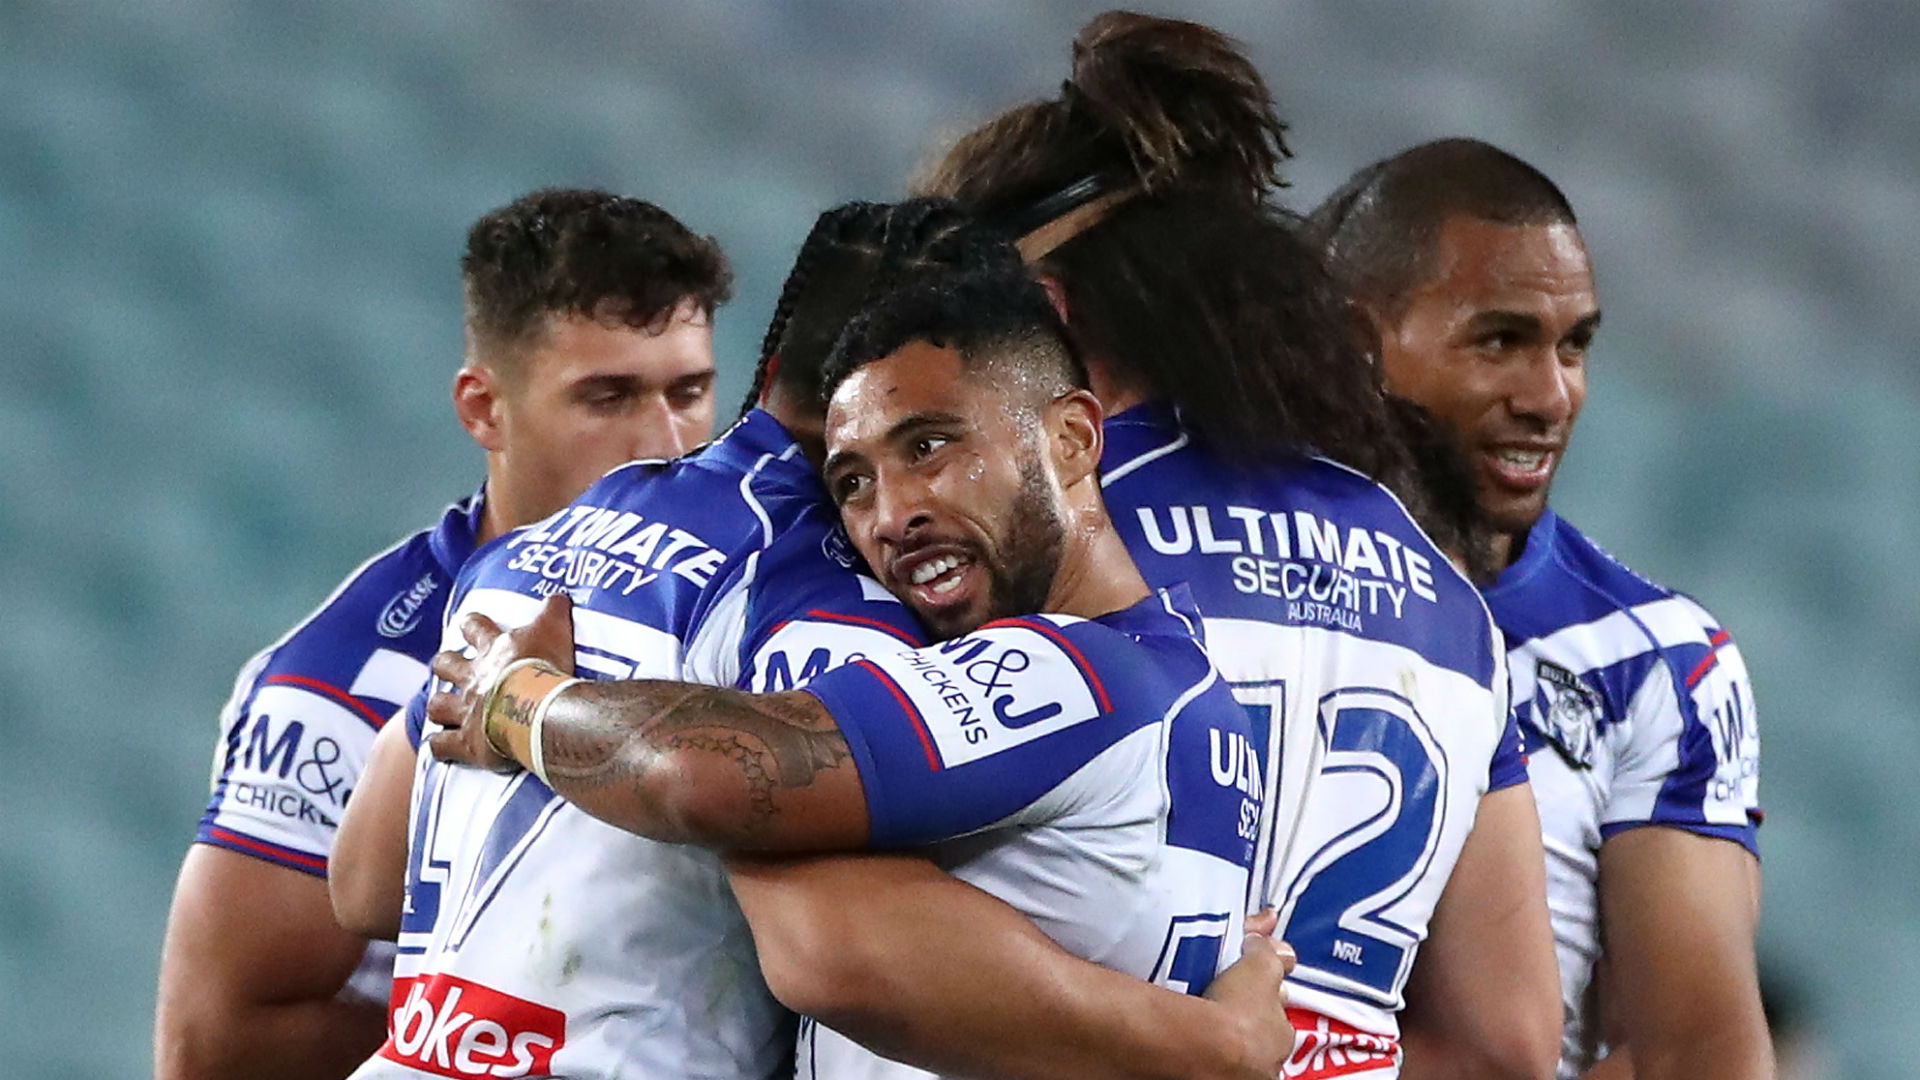 South Sydney Rabbitohs were left stunned by a brilliant start from NRL strugglers Canterbury Bulldogs in Thursday's clash.